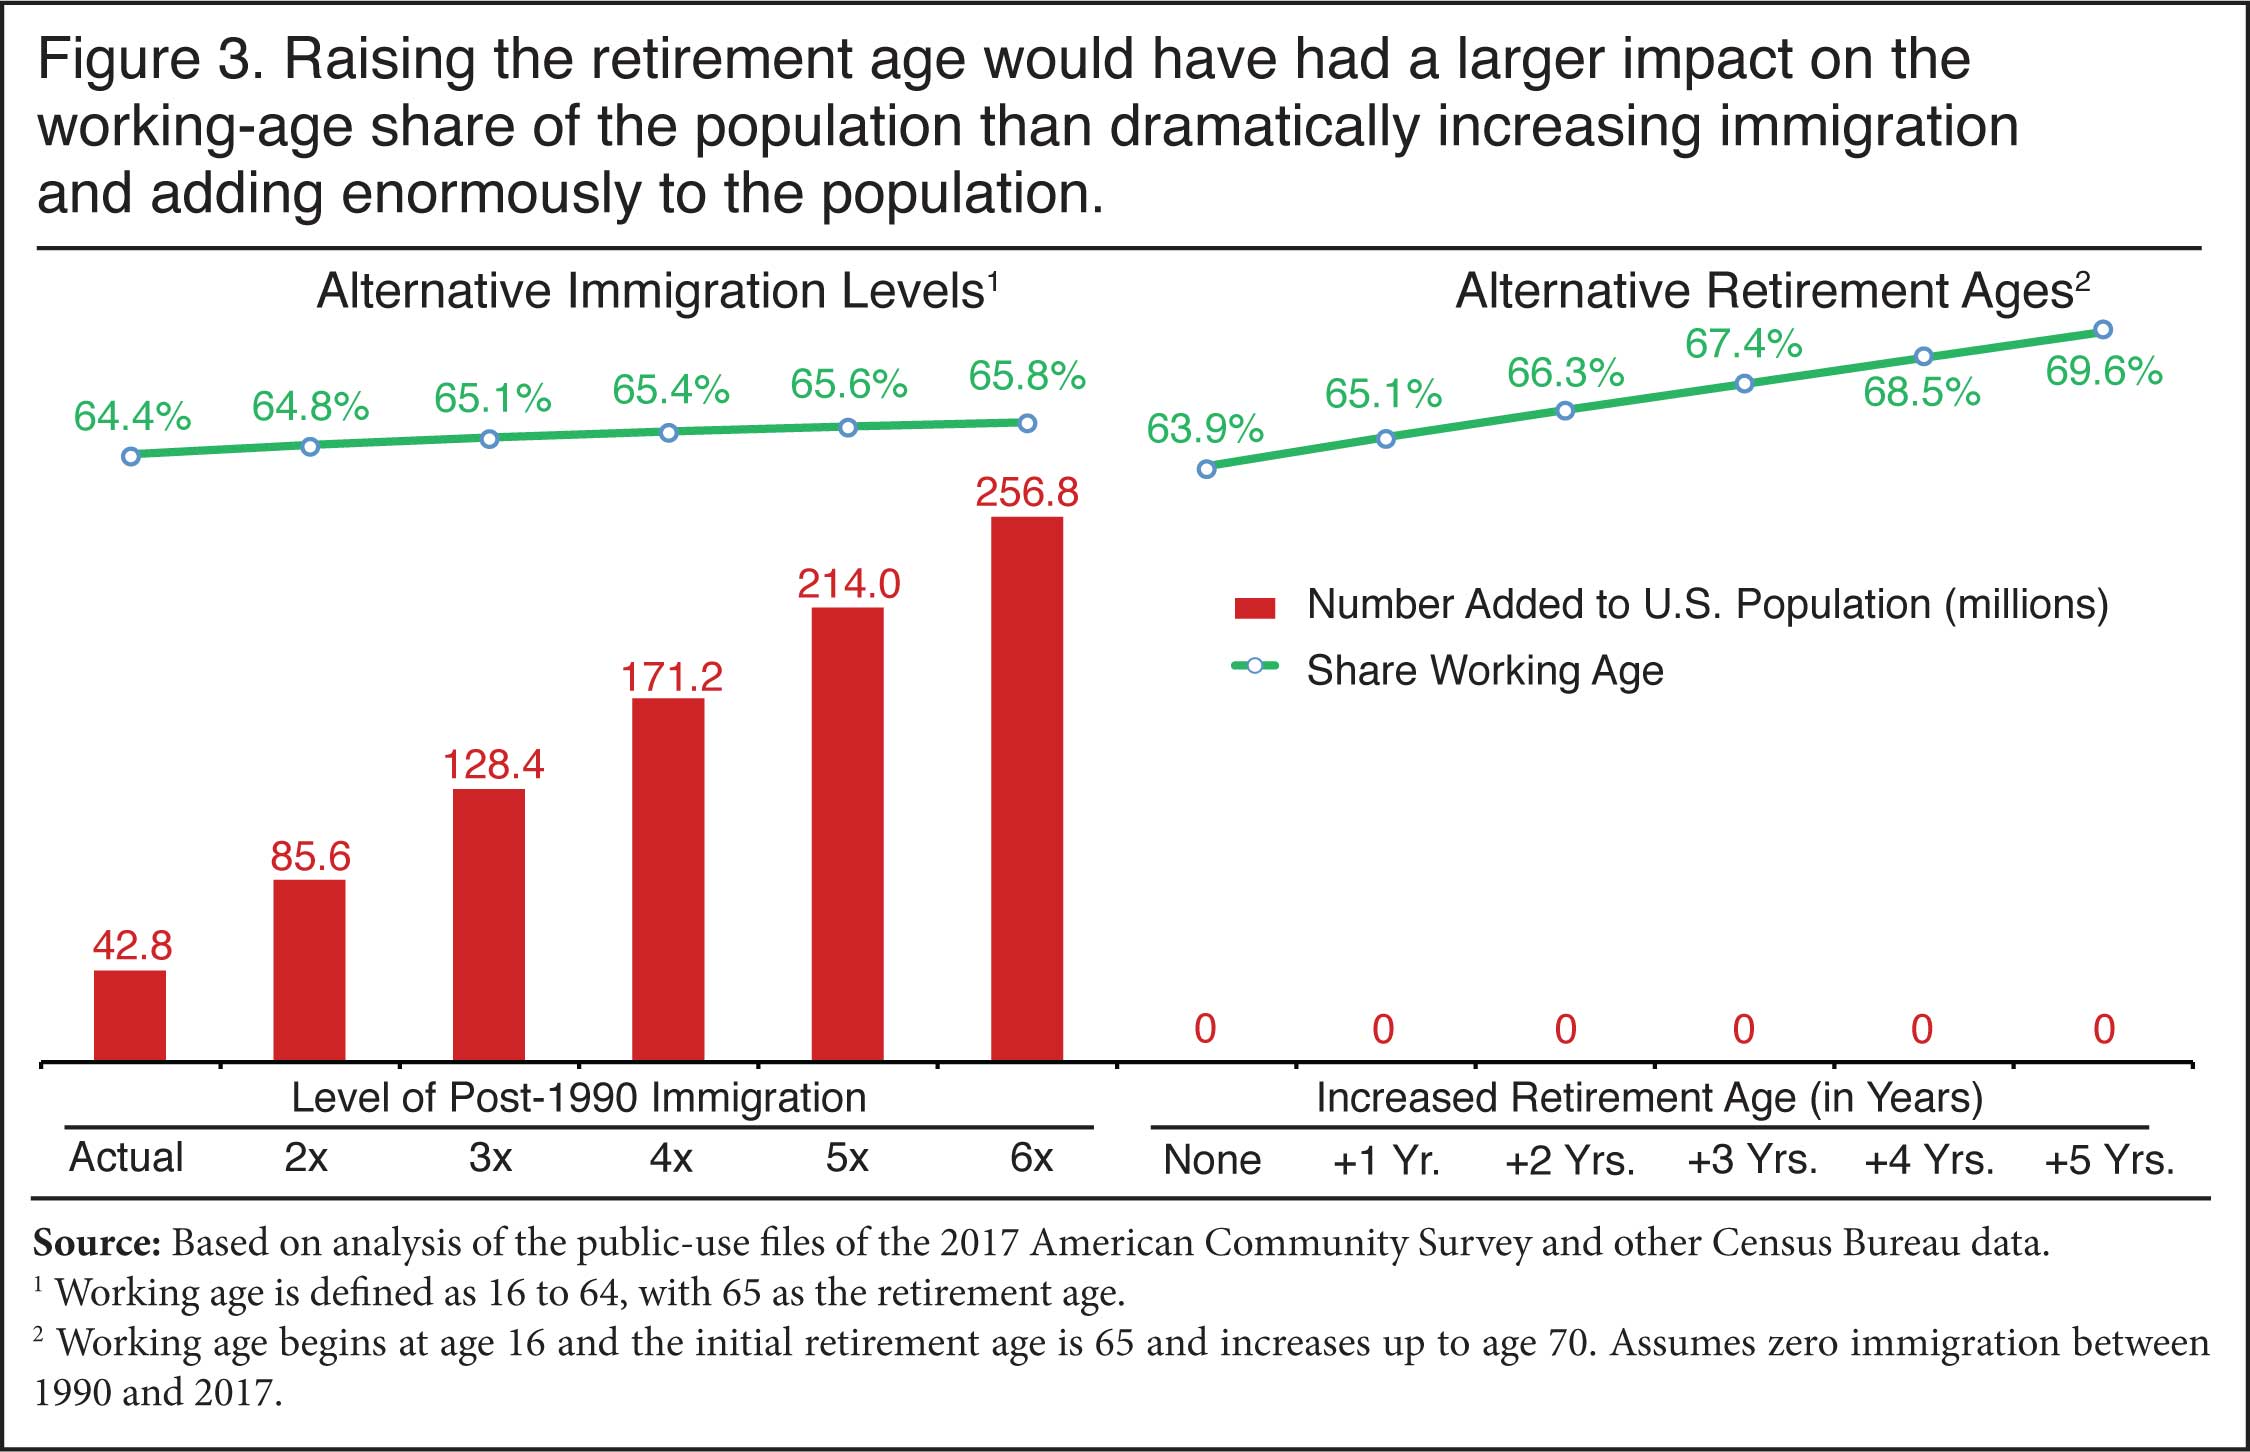 Graph: Raising the retirement age would have had a larger impact on the working age share of the population than dramatically increasing immigration and adding to the population